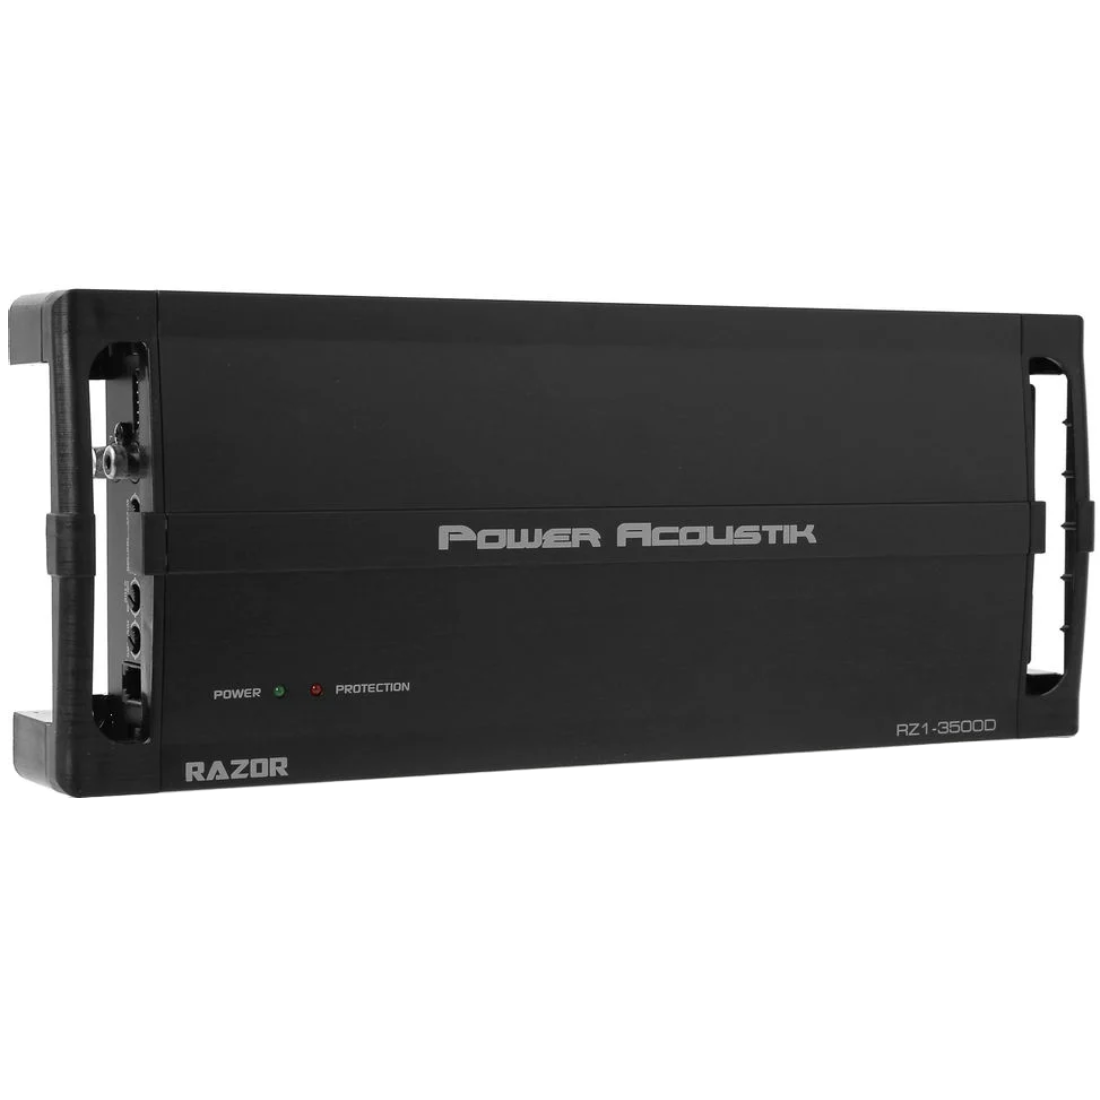 Power Acoustik RZ1-3500D 3500 Watts Max 1 Ohm MOSFET Mono-Channel Car Stereo Amplifier